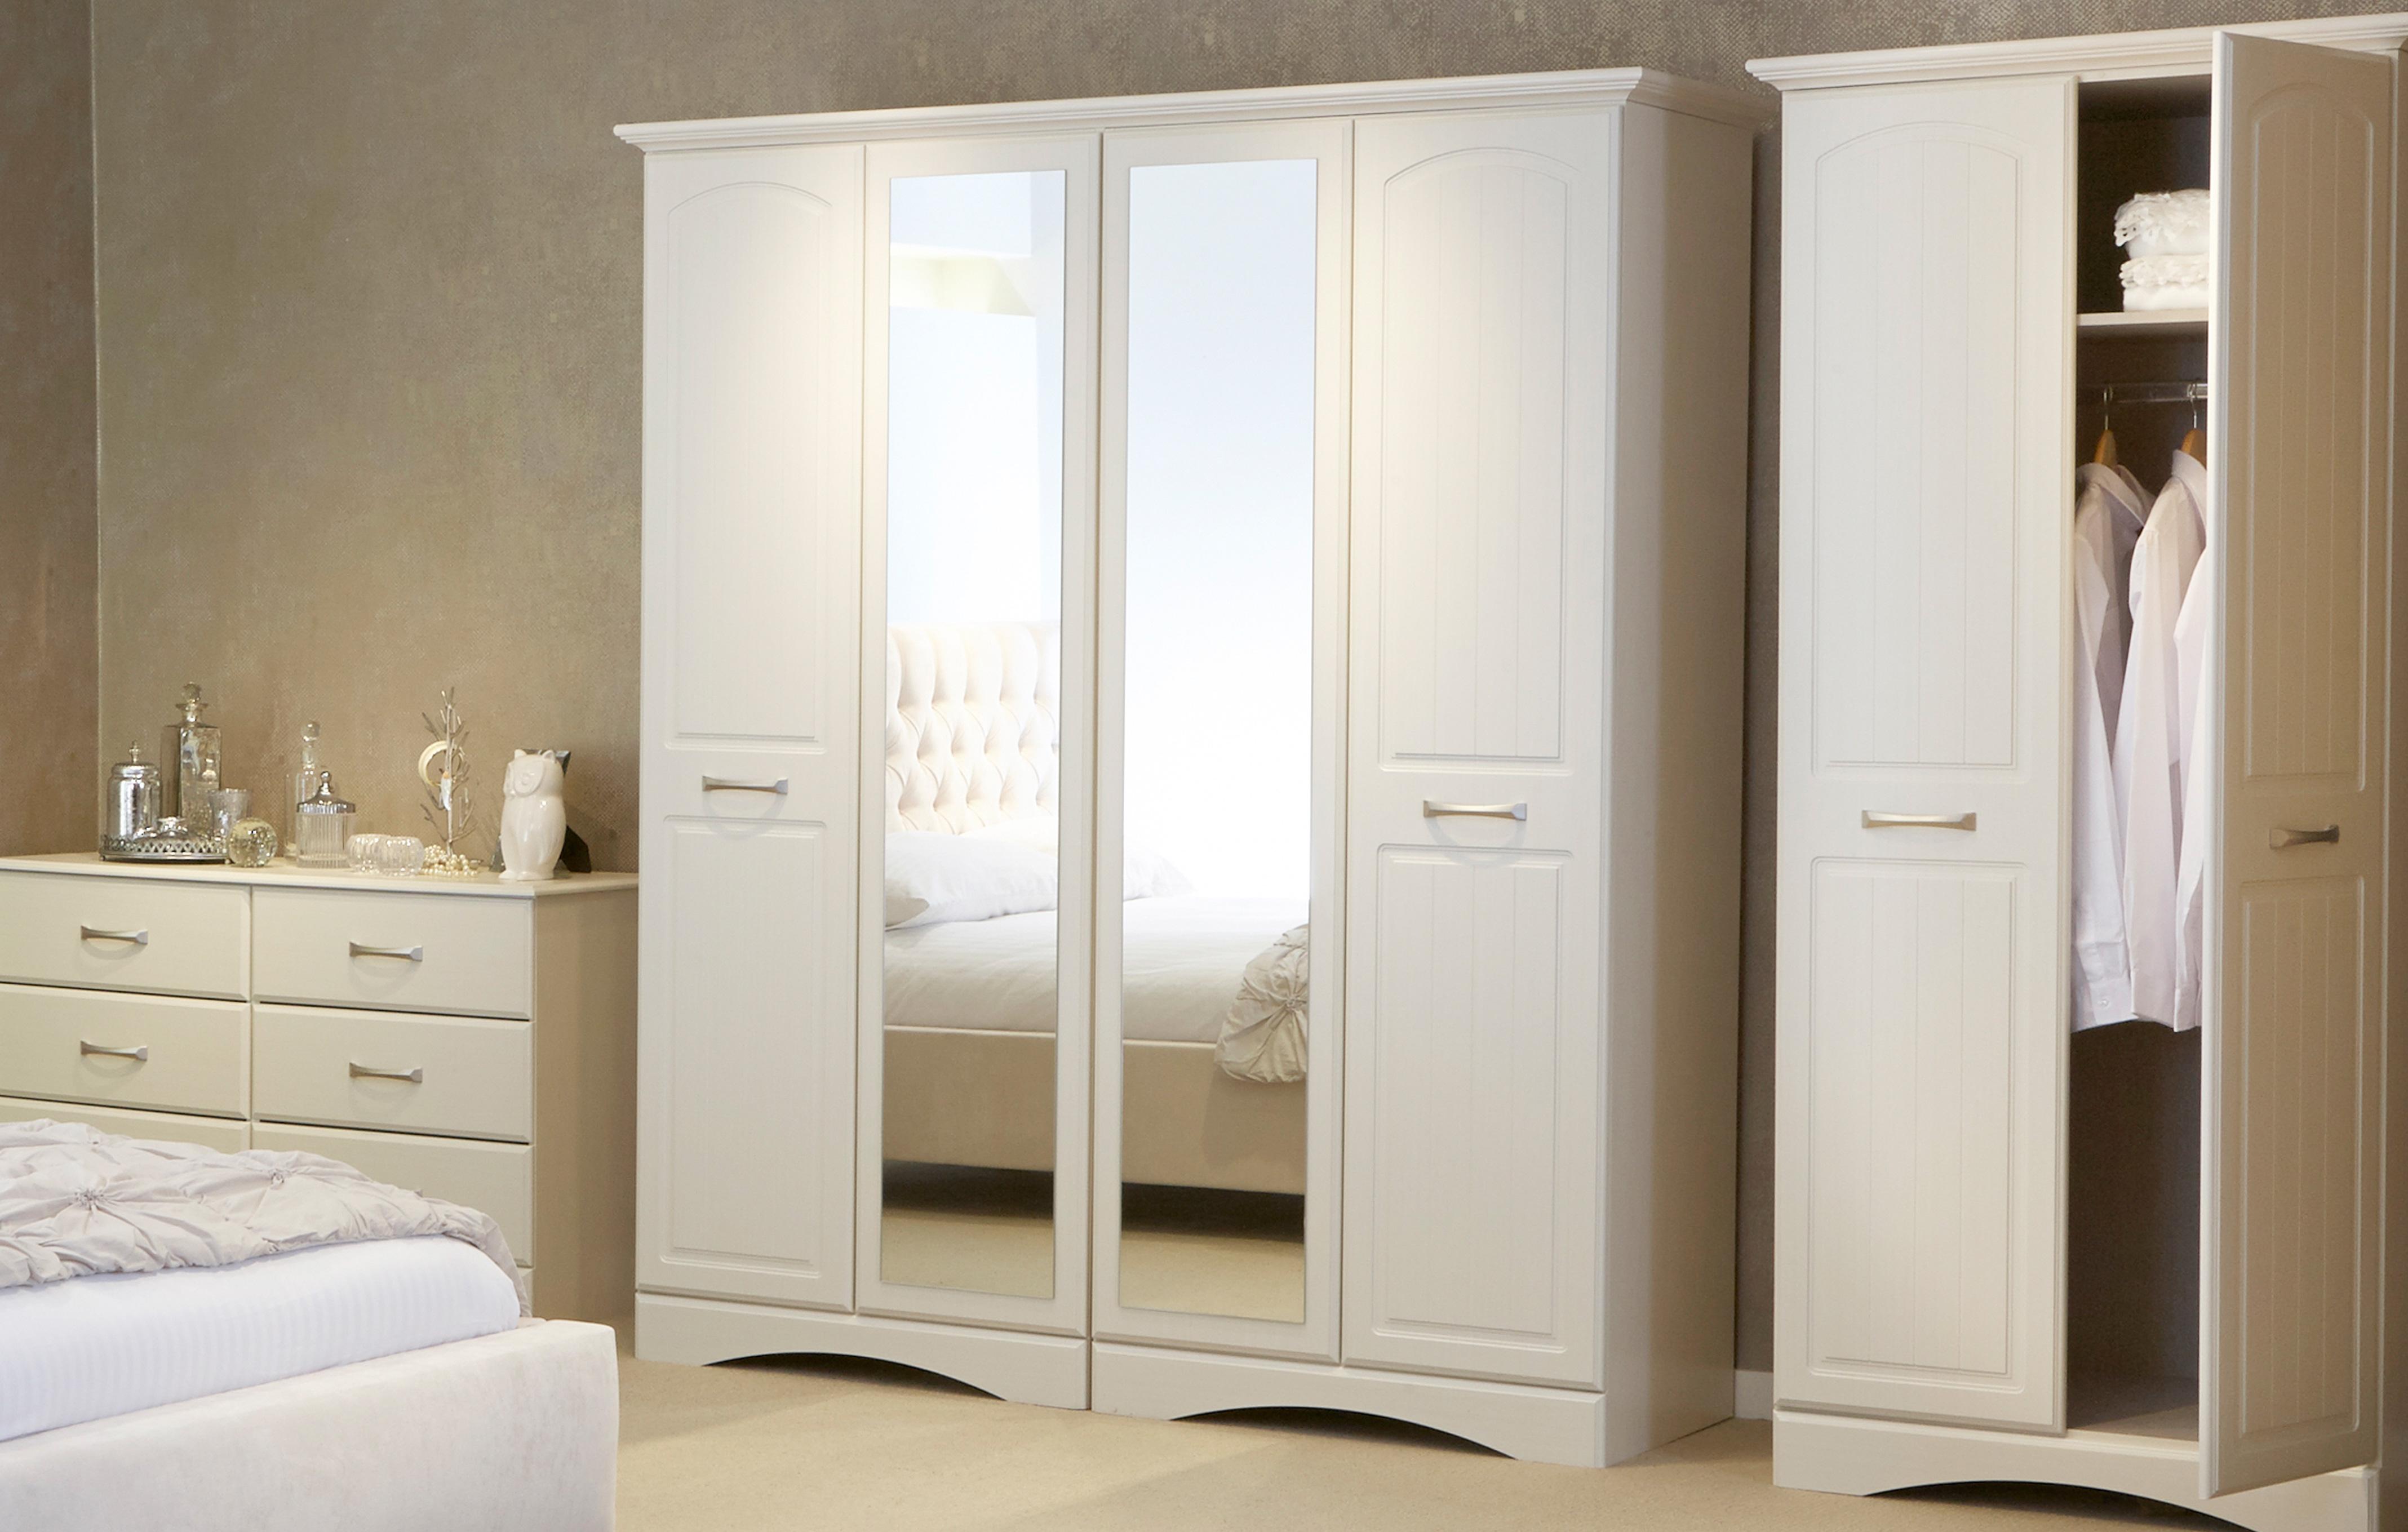 Wardrobes For Your Bedroom In A Range Of Styles | DFS